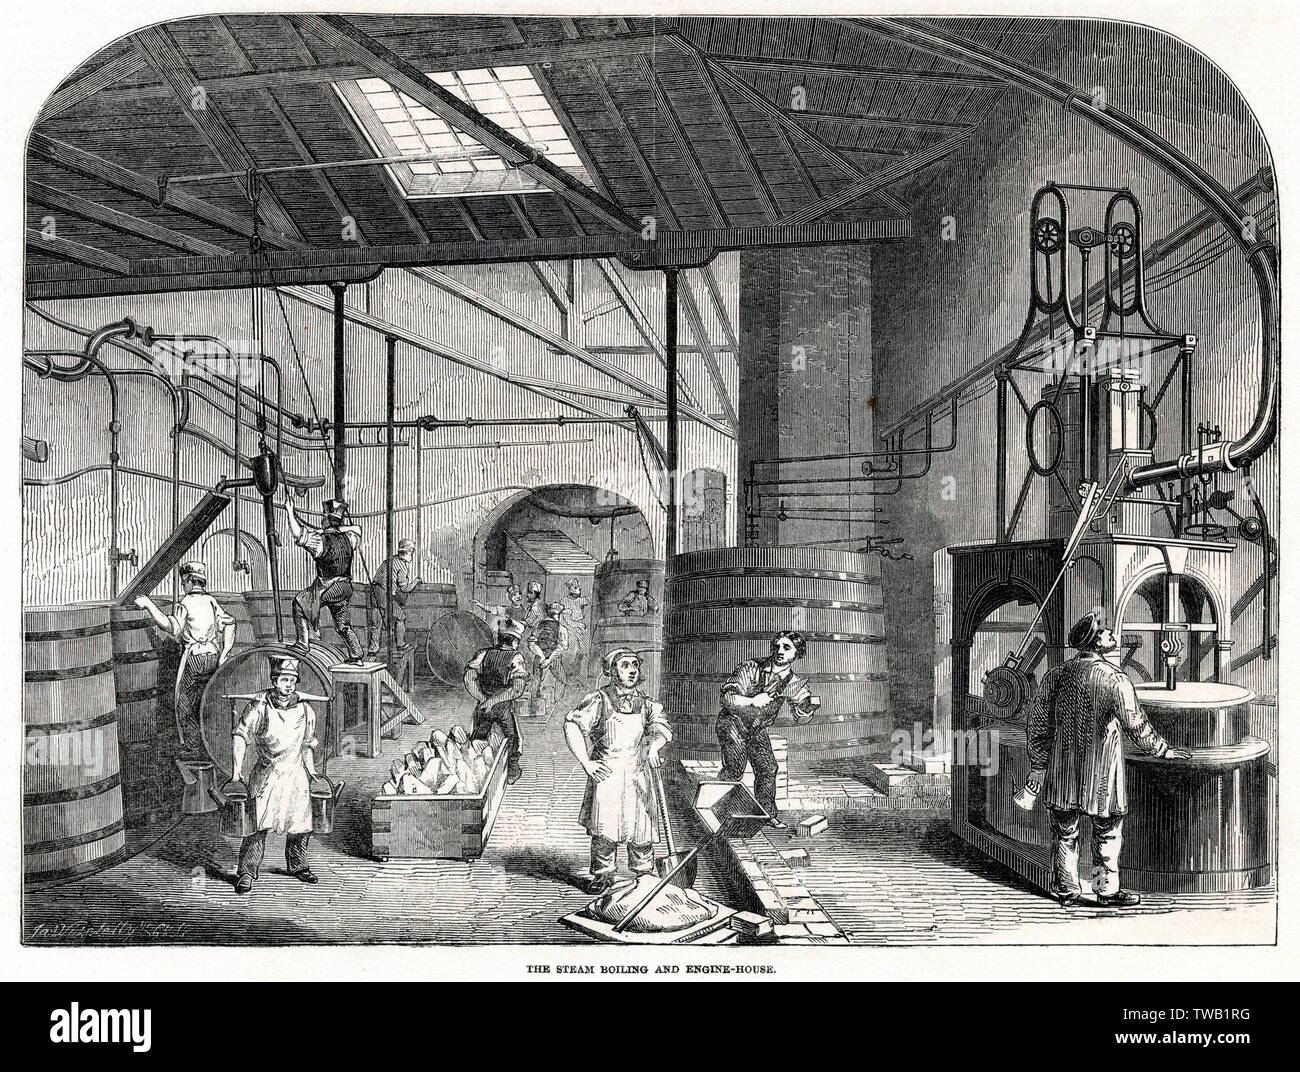 Price's Patent Candle Company's Works 1849 Stockfoto